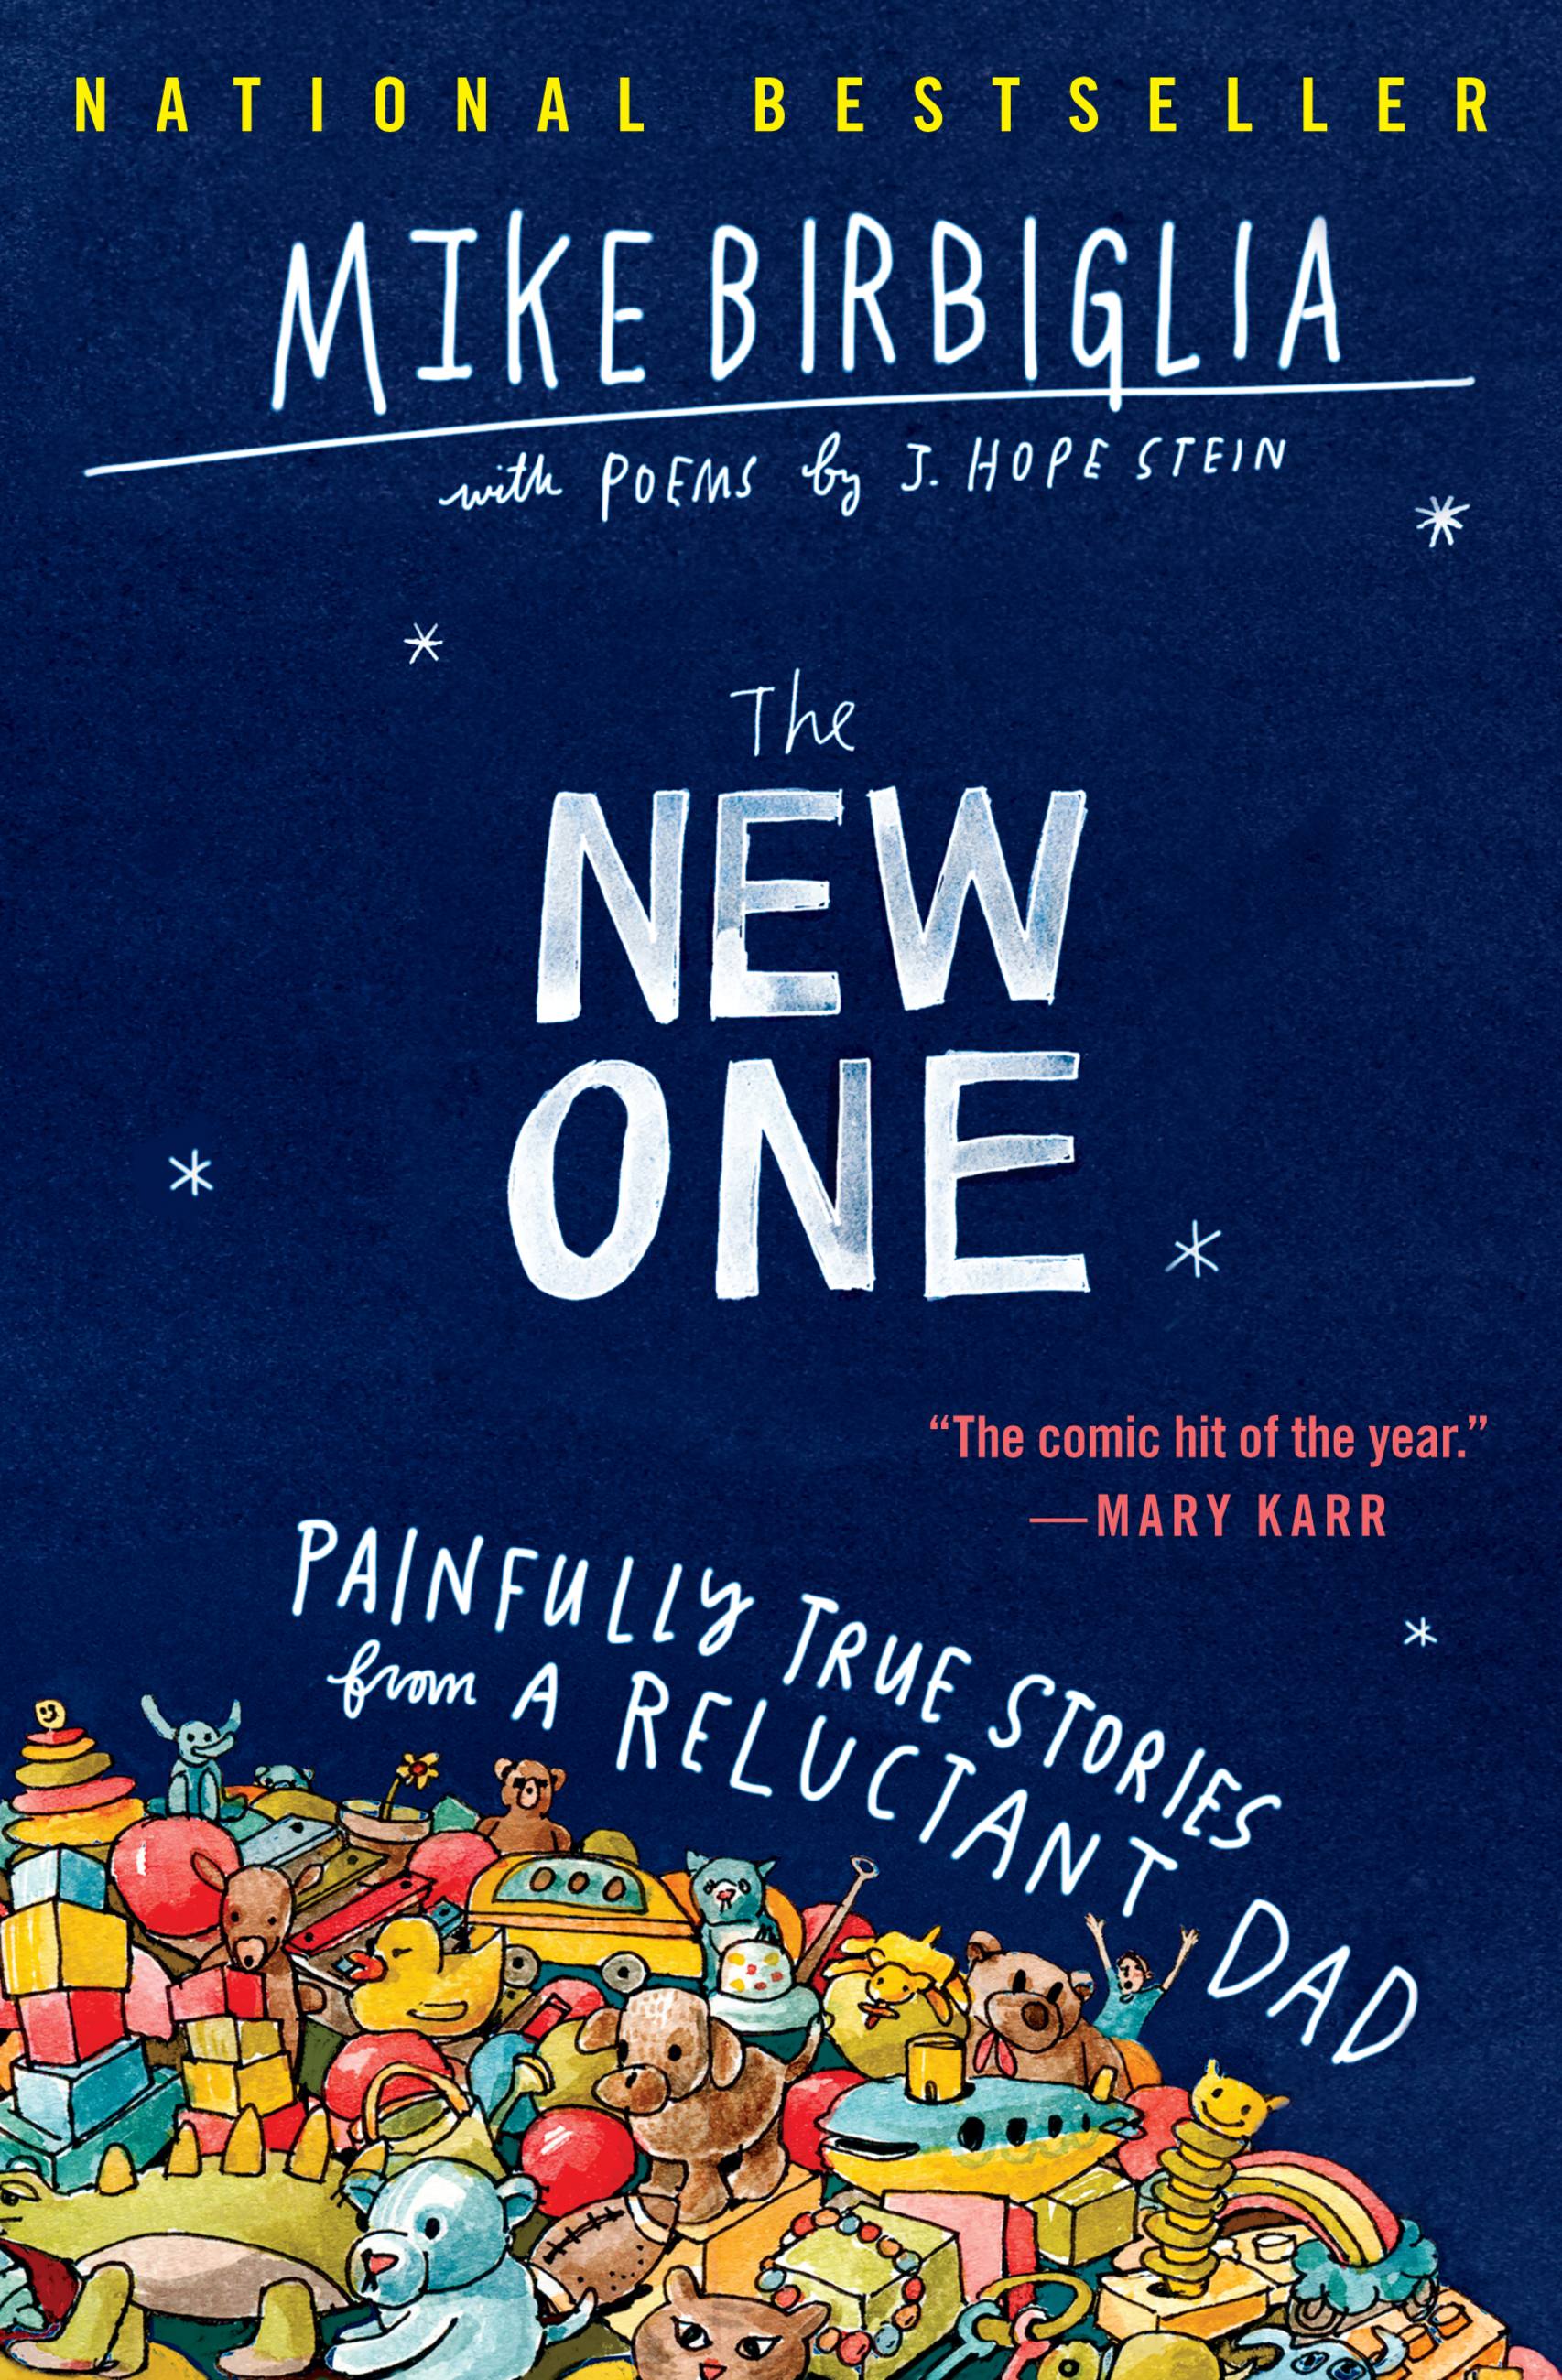 The New One by Mike Birbiglia Hachette Book Group photo photo picture